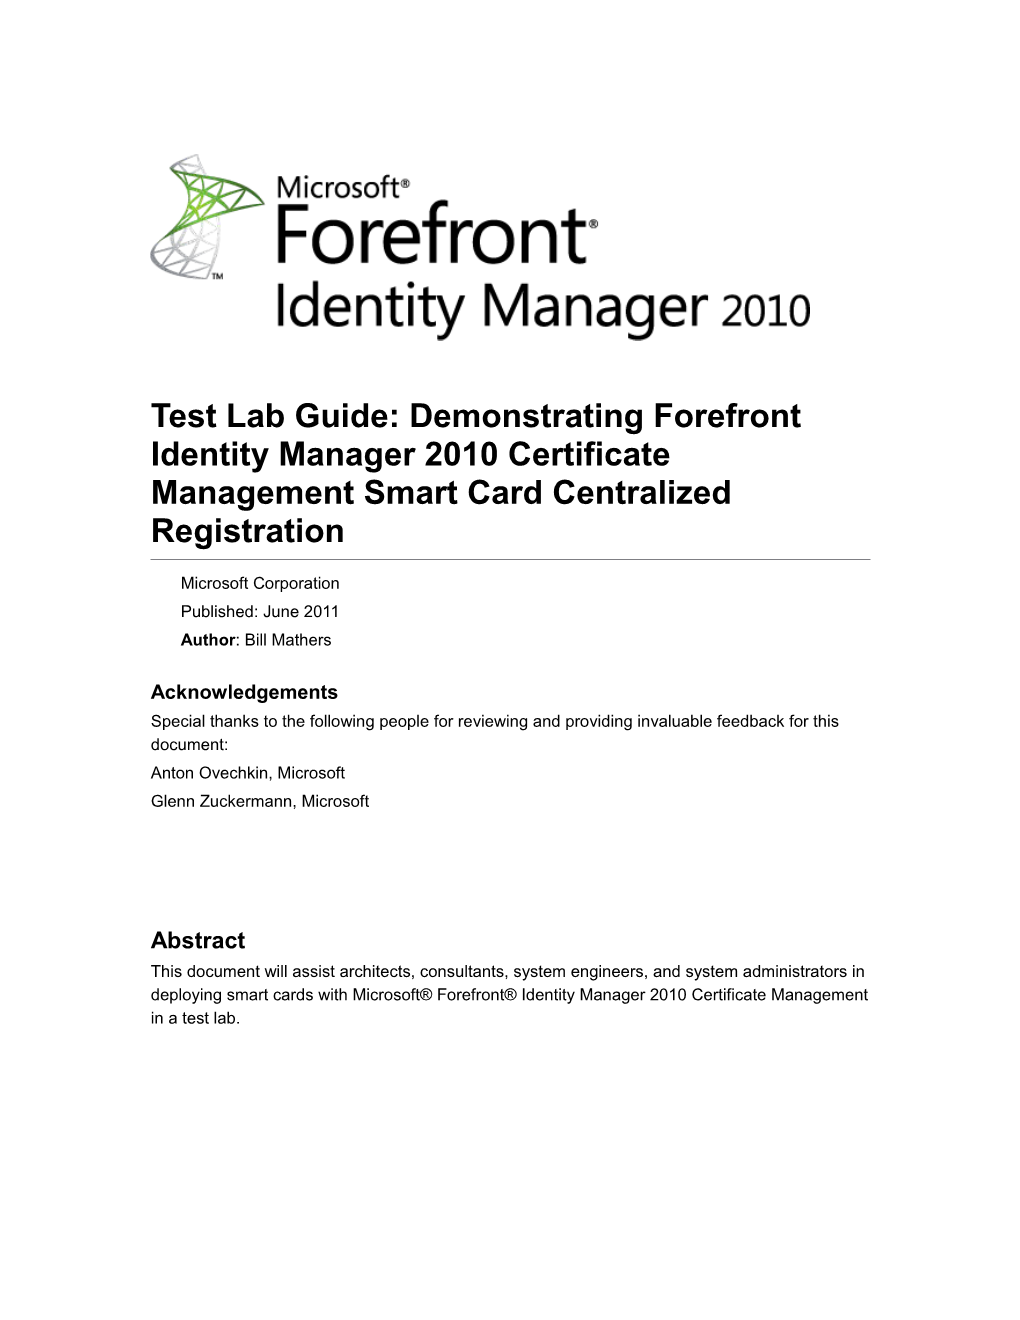 Test Lab Guide: Demonstrating Forefront Identity Manager 2010 Certificate Management Smart